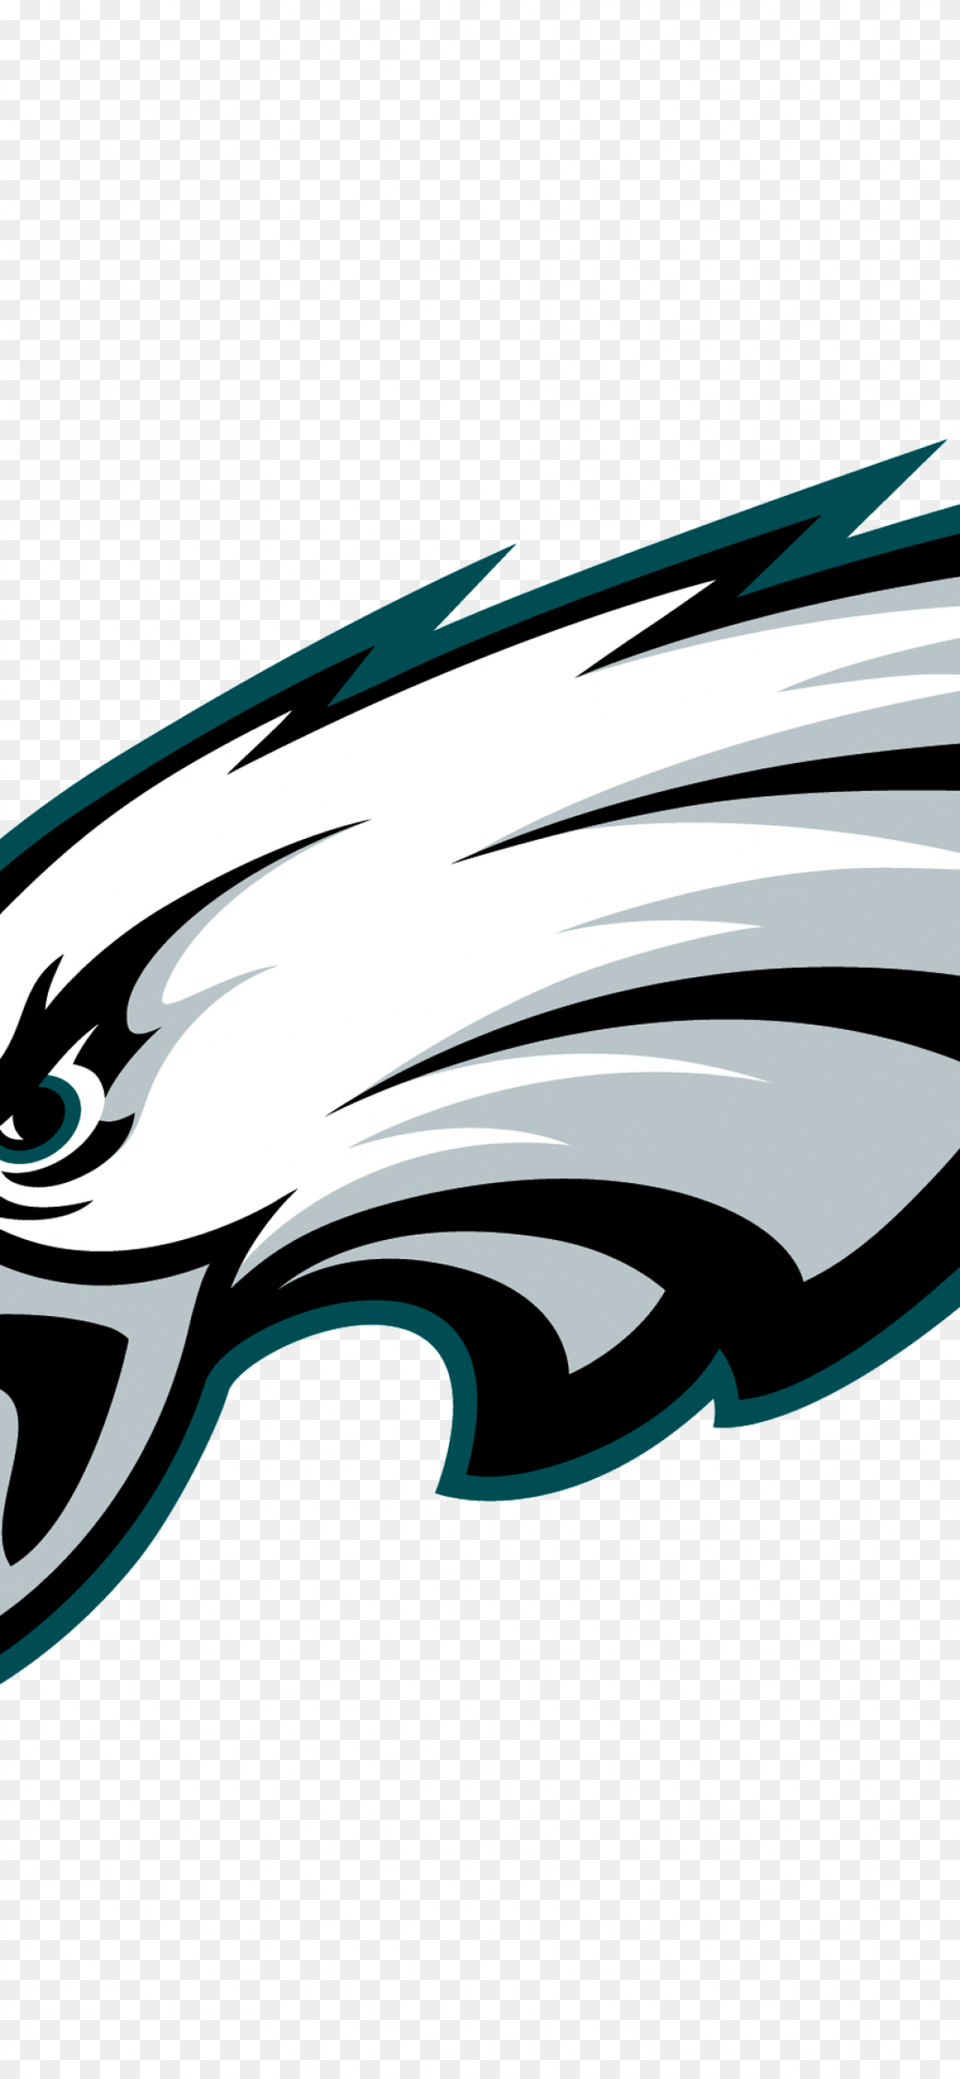 Philadelphia Eagles Iphone X Wallpaper Download, Person Png Image